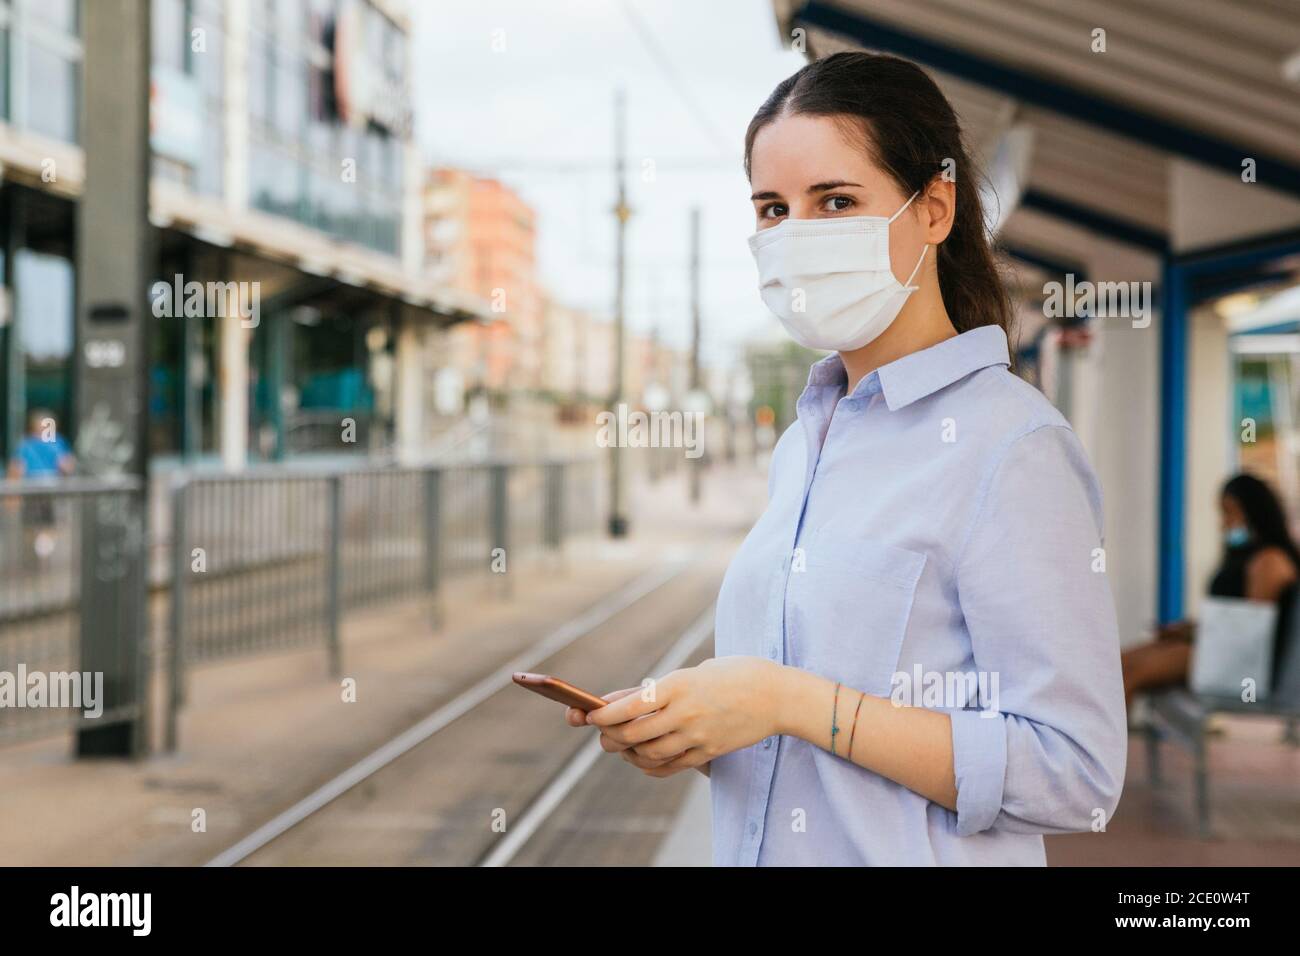 Stock photo of a young woman wearing a face mask, holding a phone and waiting on a tram station. New normal concept Stock Photo